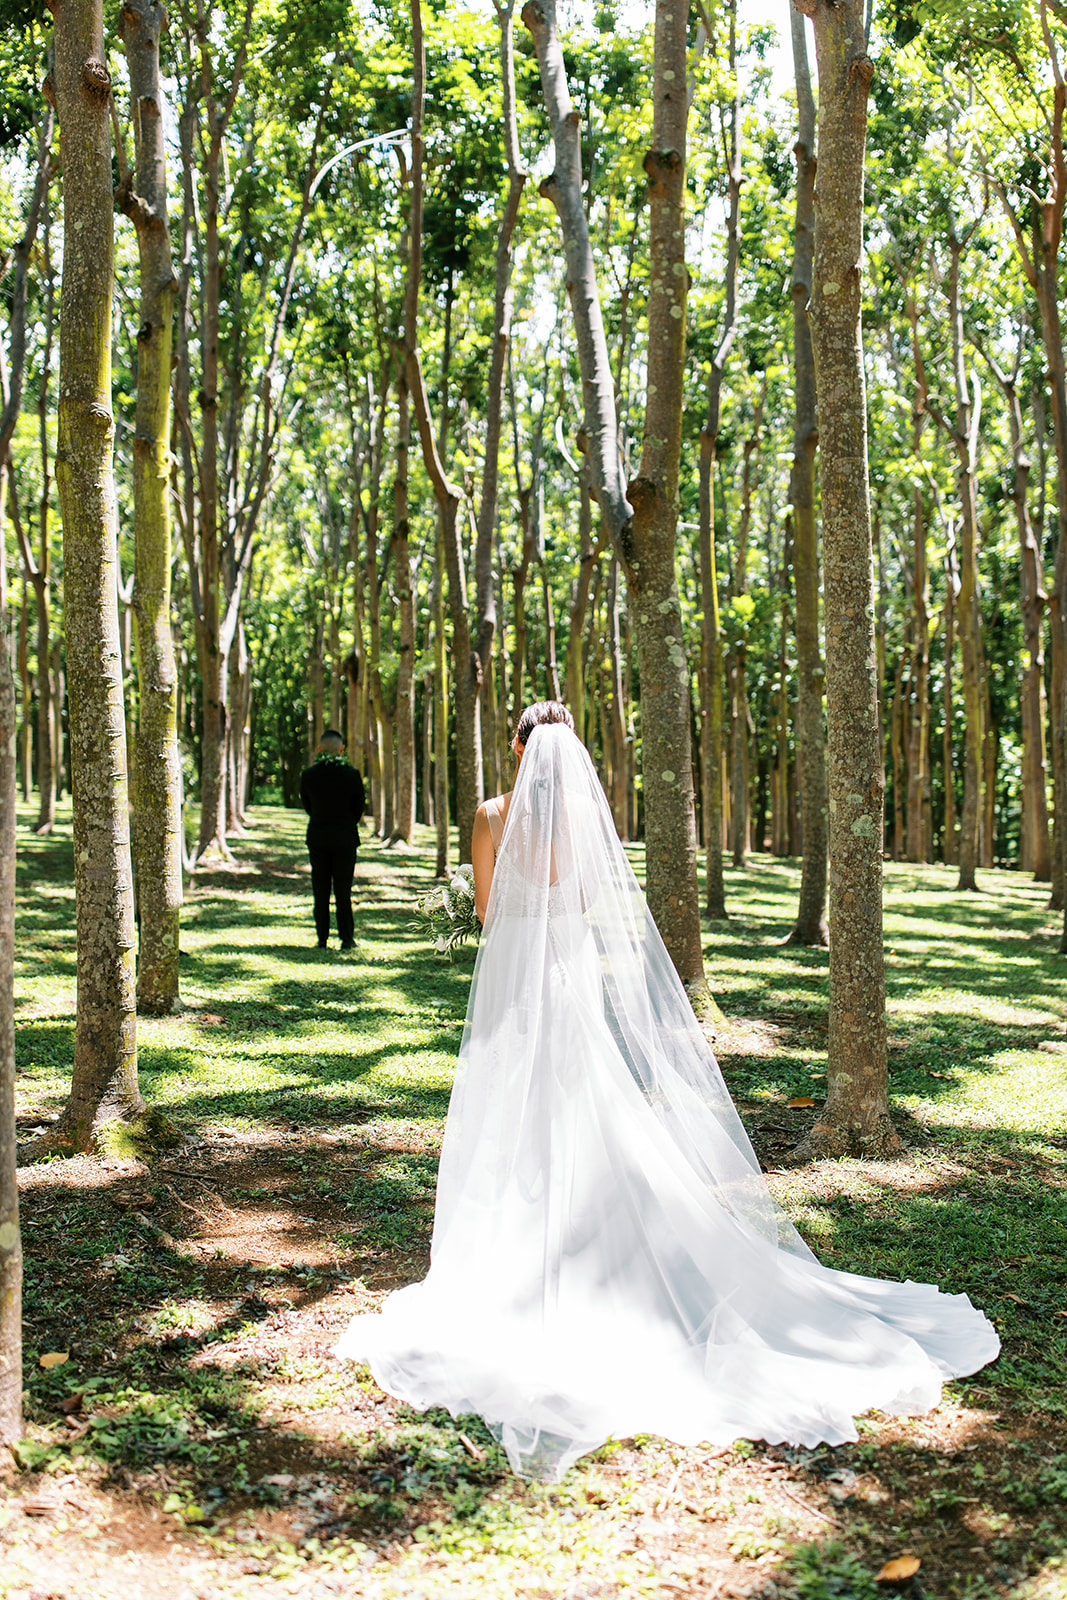 Bride approaching groom in a forest clearing captured by Oahu Wedding Photographer